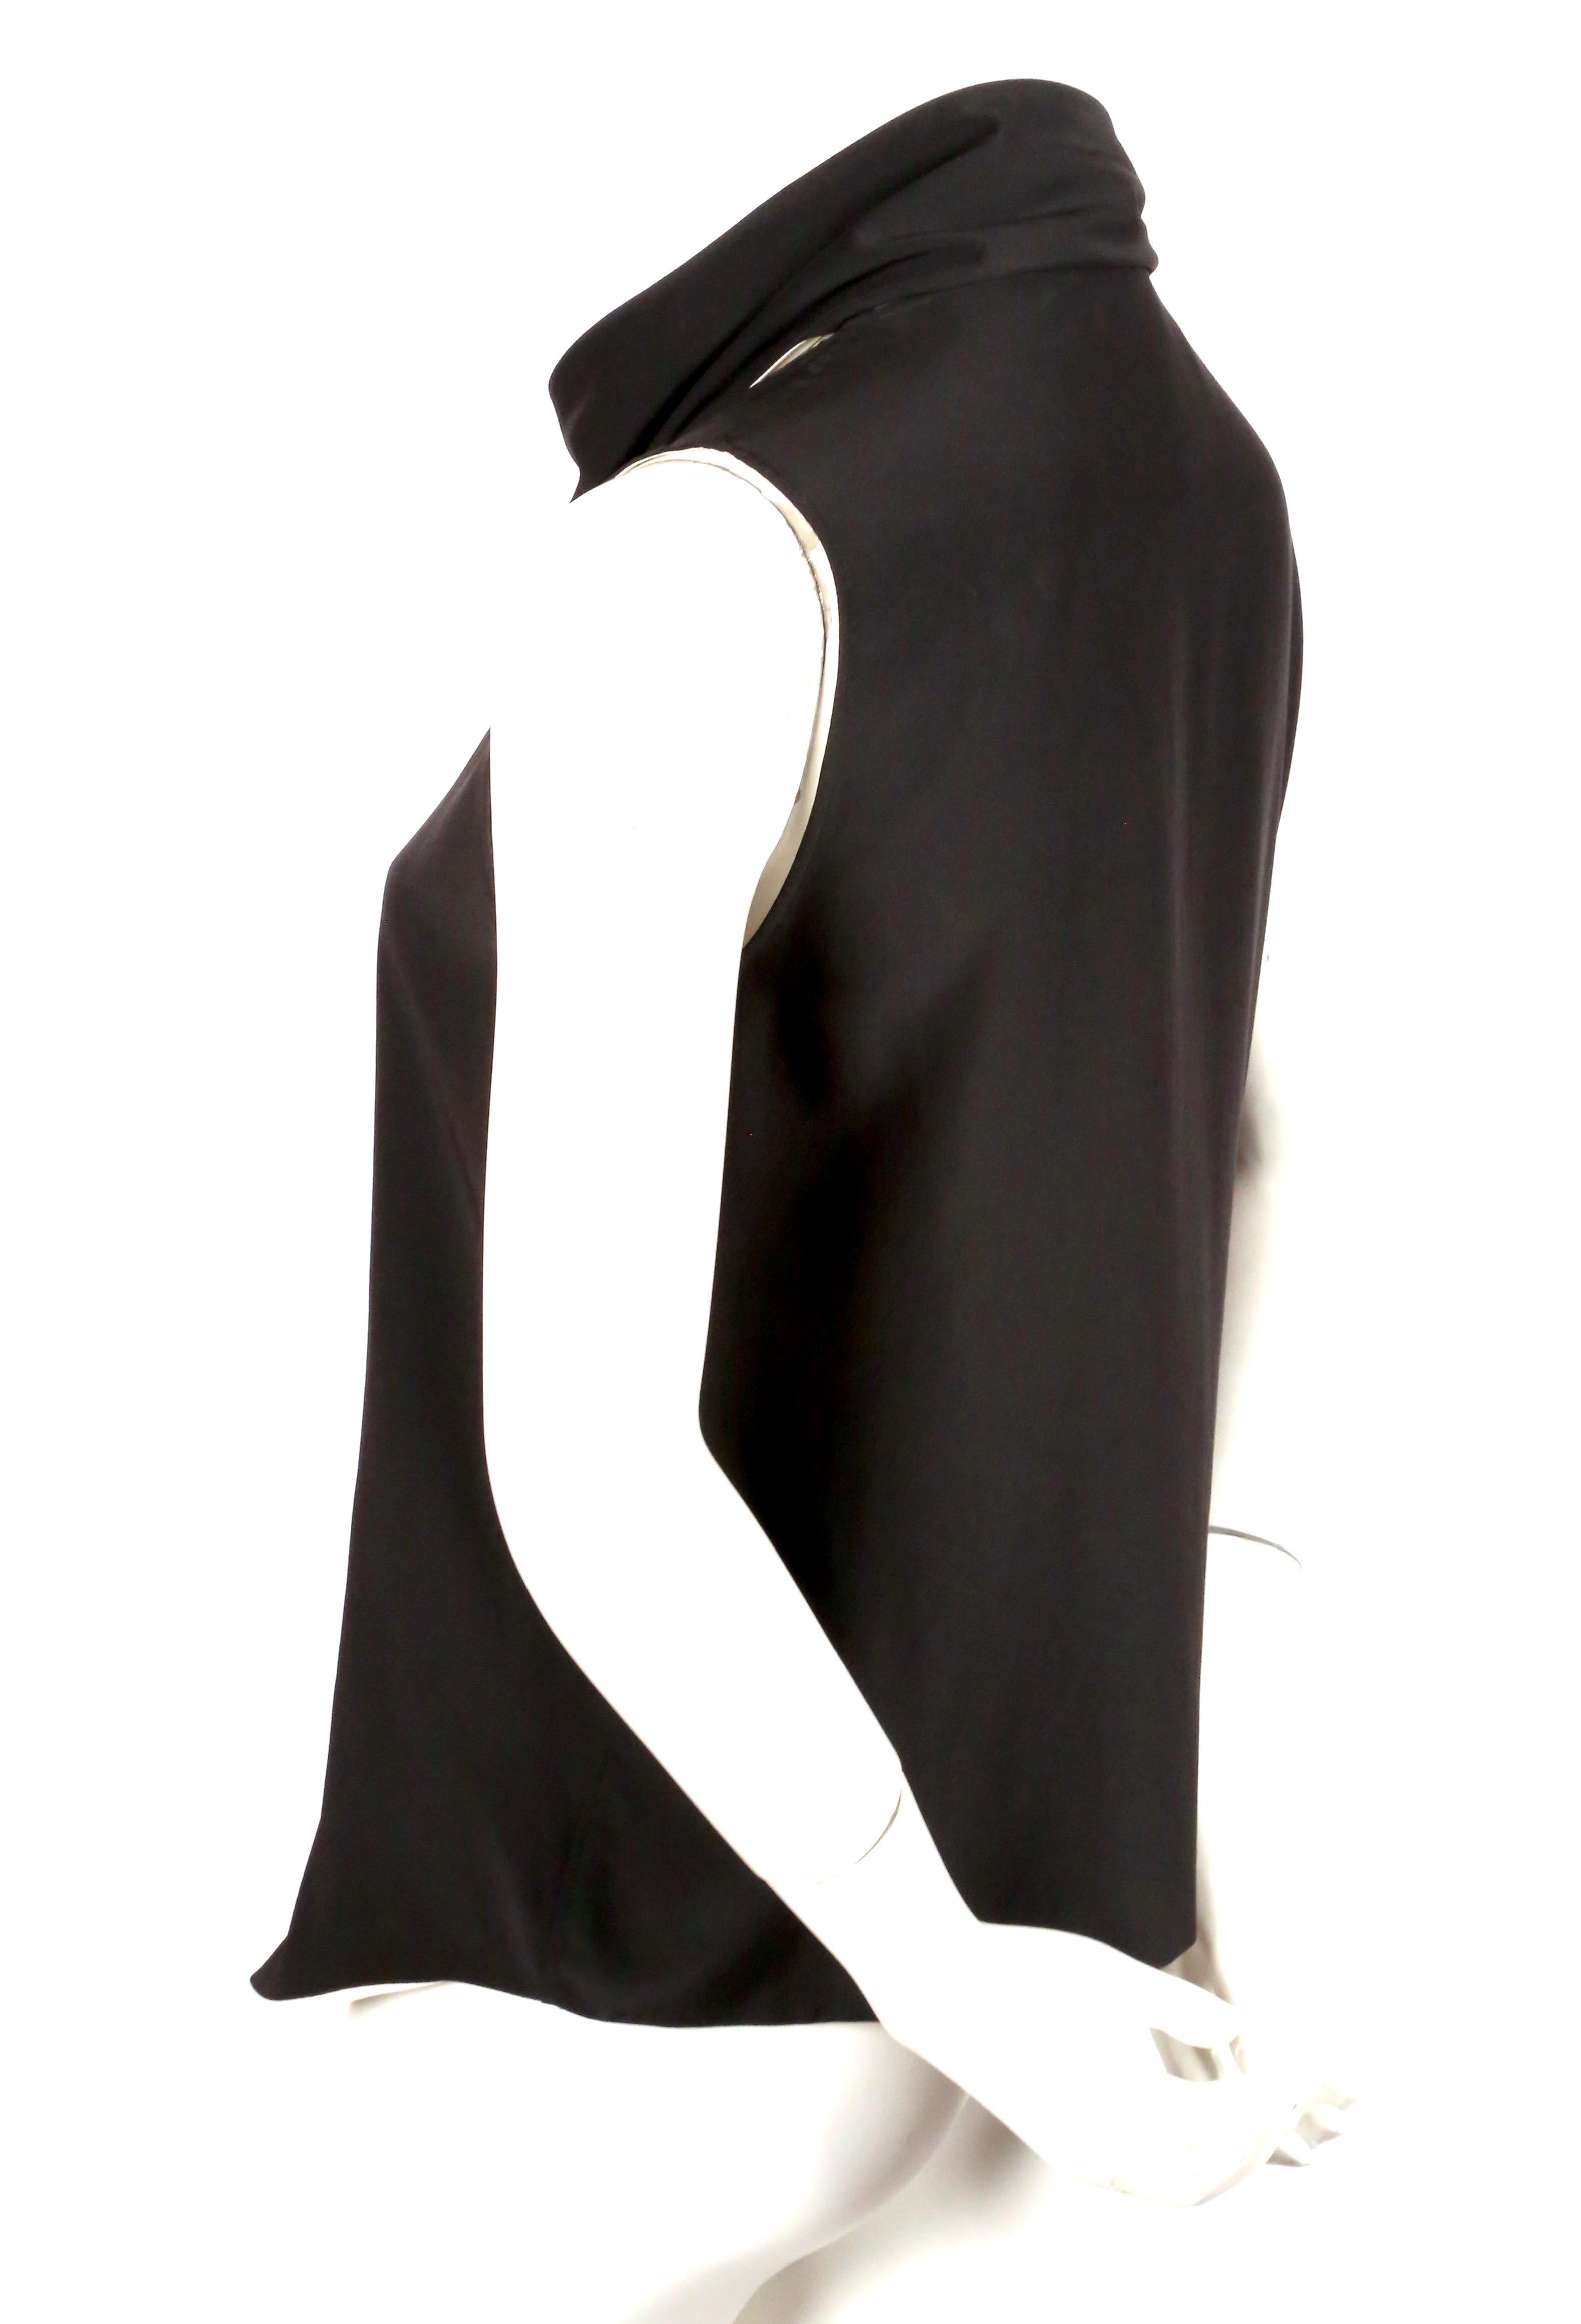 Black and cream silk top with draped wrap scarf neckline designed by Phoebe Philo for her first collection for Celine - Resort 2010. French size 36. Measures approximately: 14